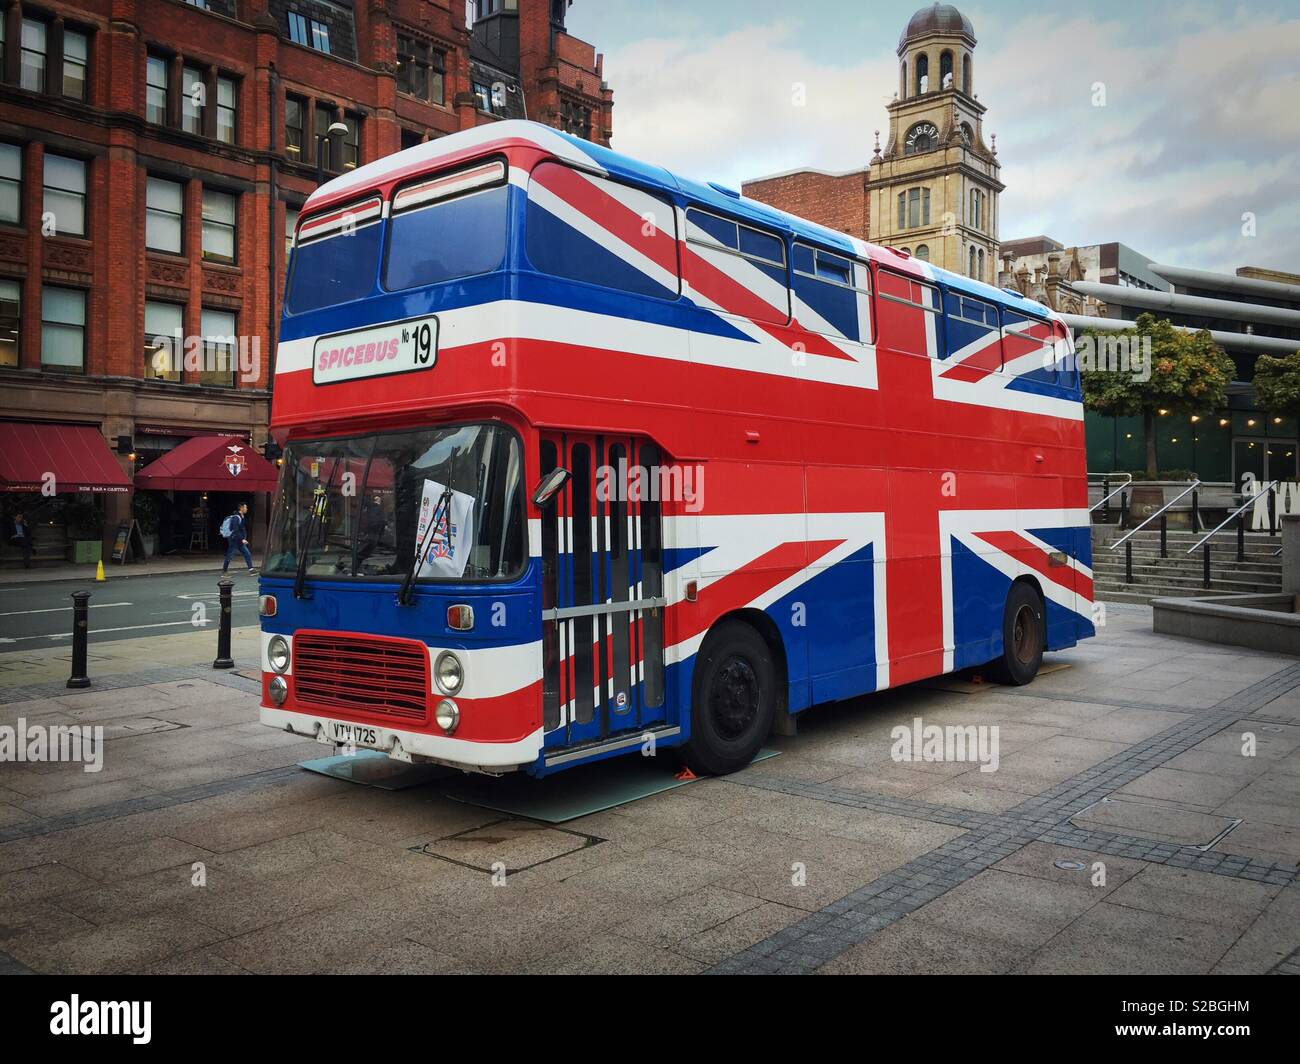 Spice girls bus in Manchester Stock Photo